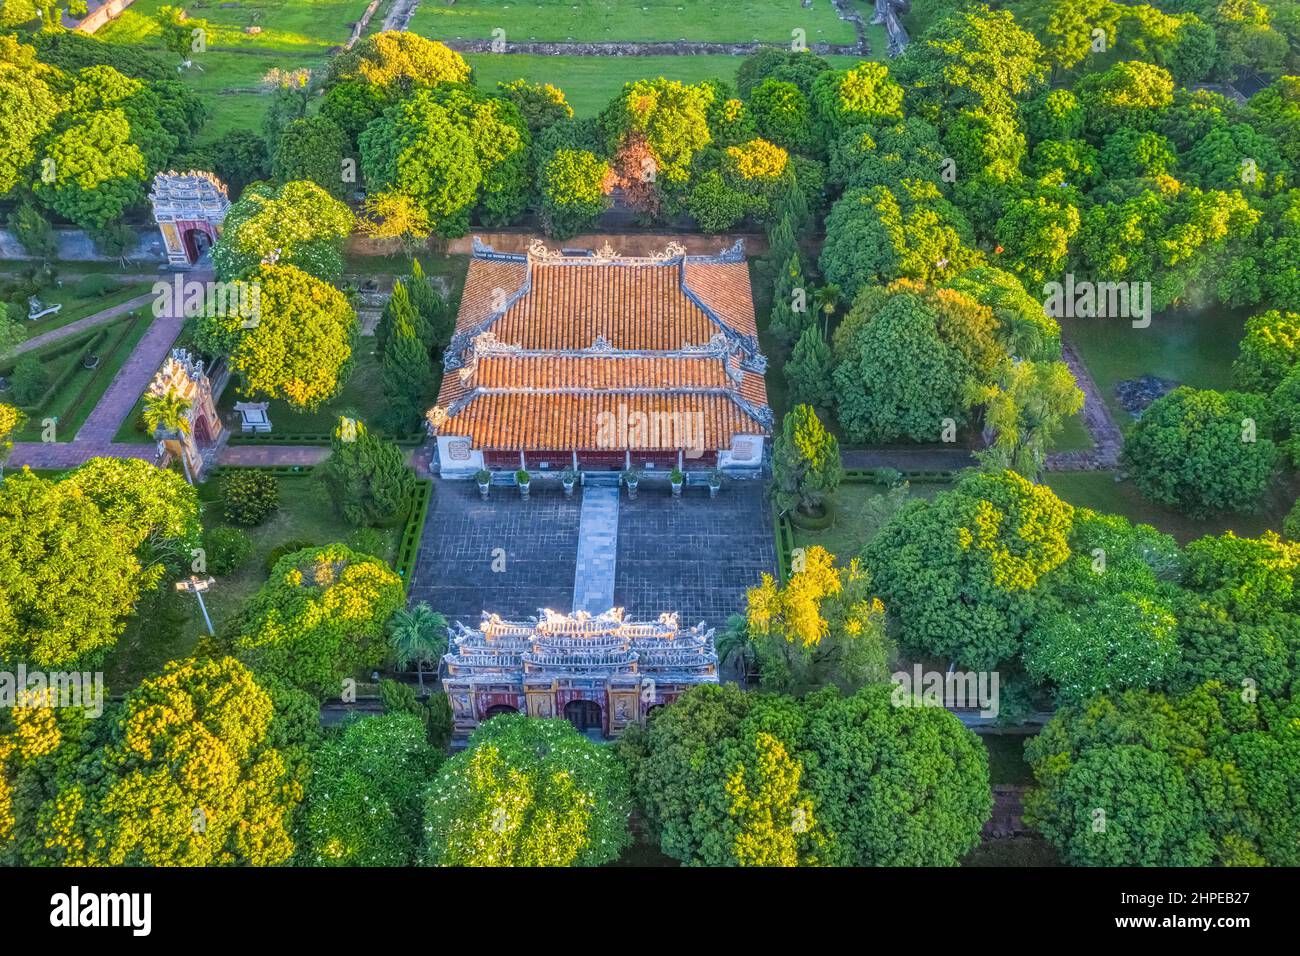 Hung Mieu or Hung temple in the Imperial City with the Purple Forbidden City within the Citadel in Hue, Vietnam. Stock Photo